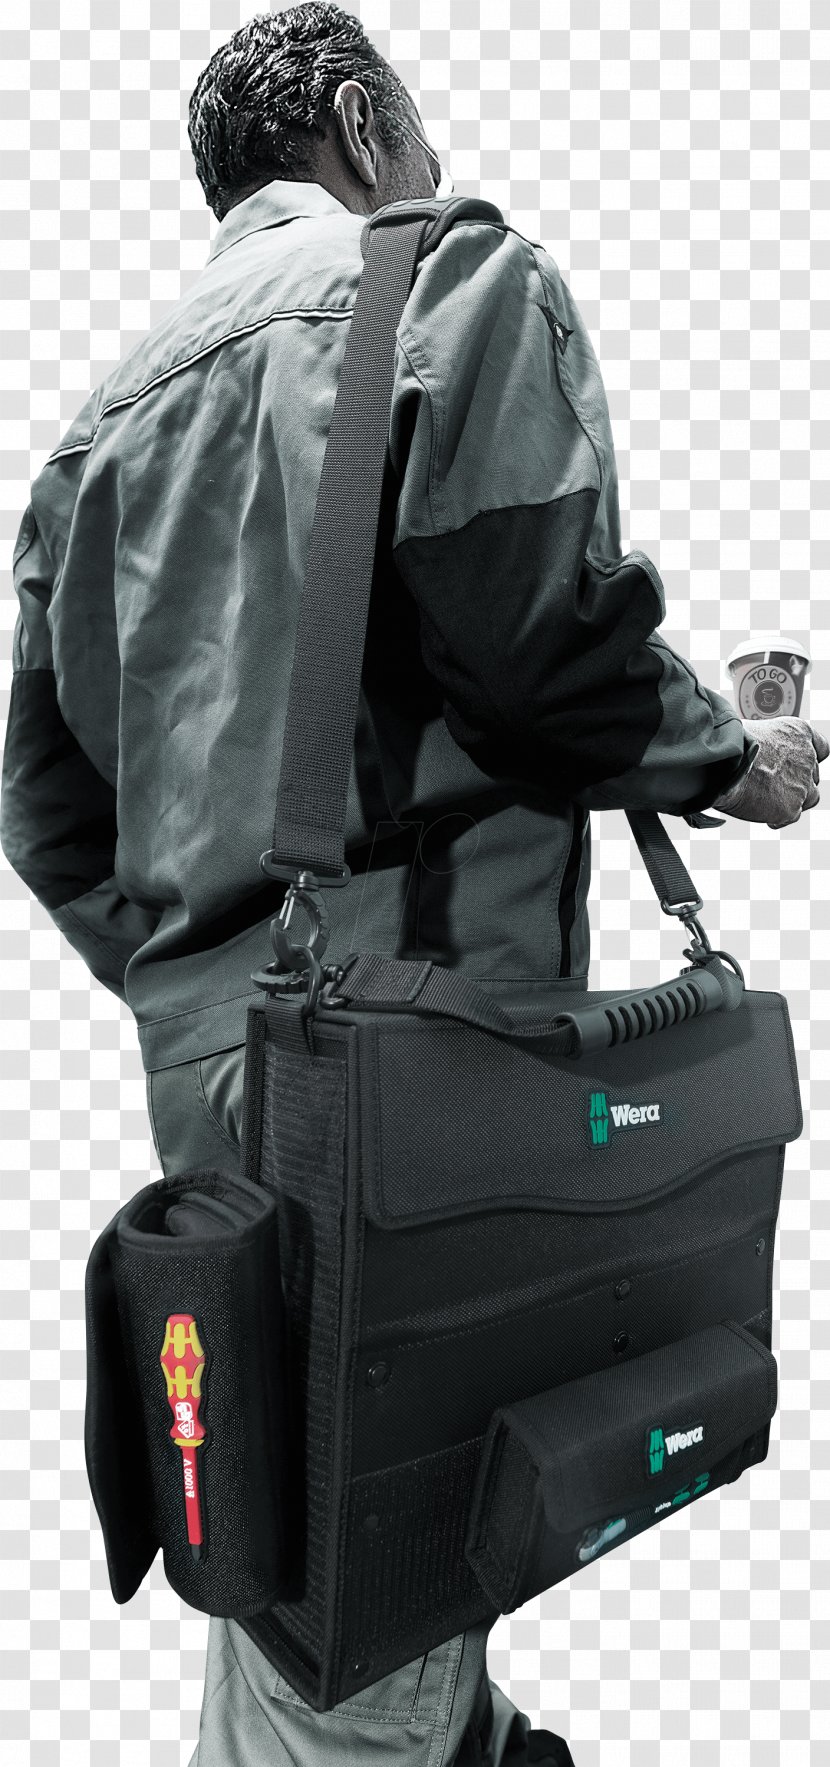 Wera Tools Dry Box Bag Industry - Personal Protective Equipment - Computeraided Software Engineering Transparent PNG